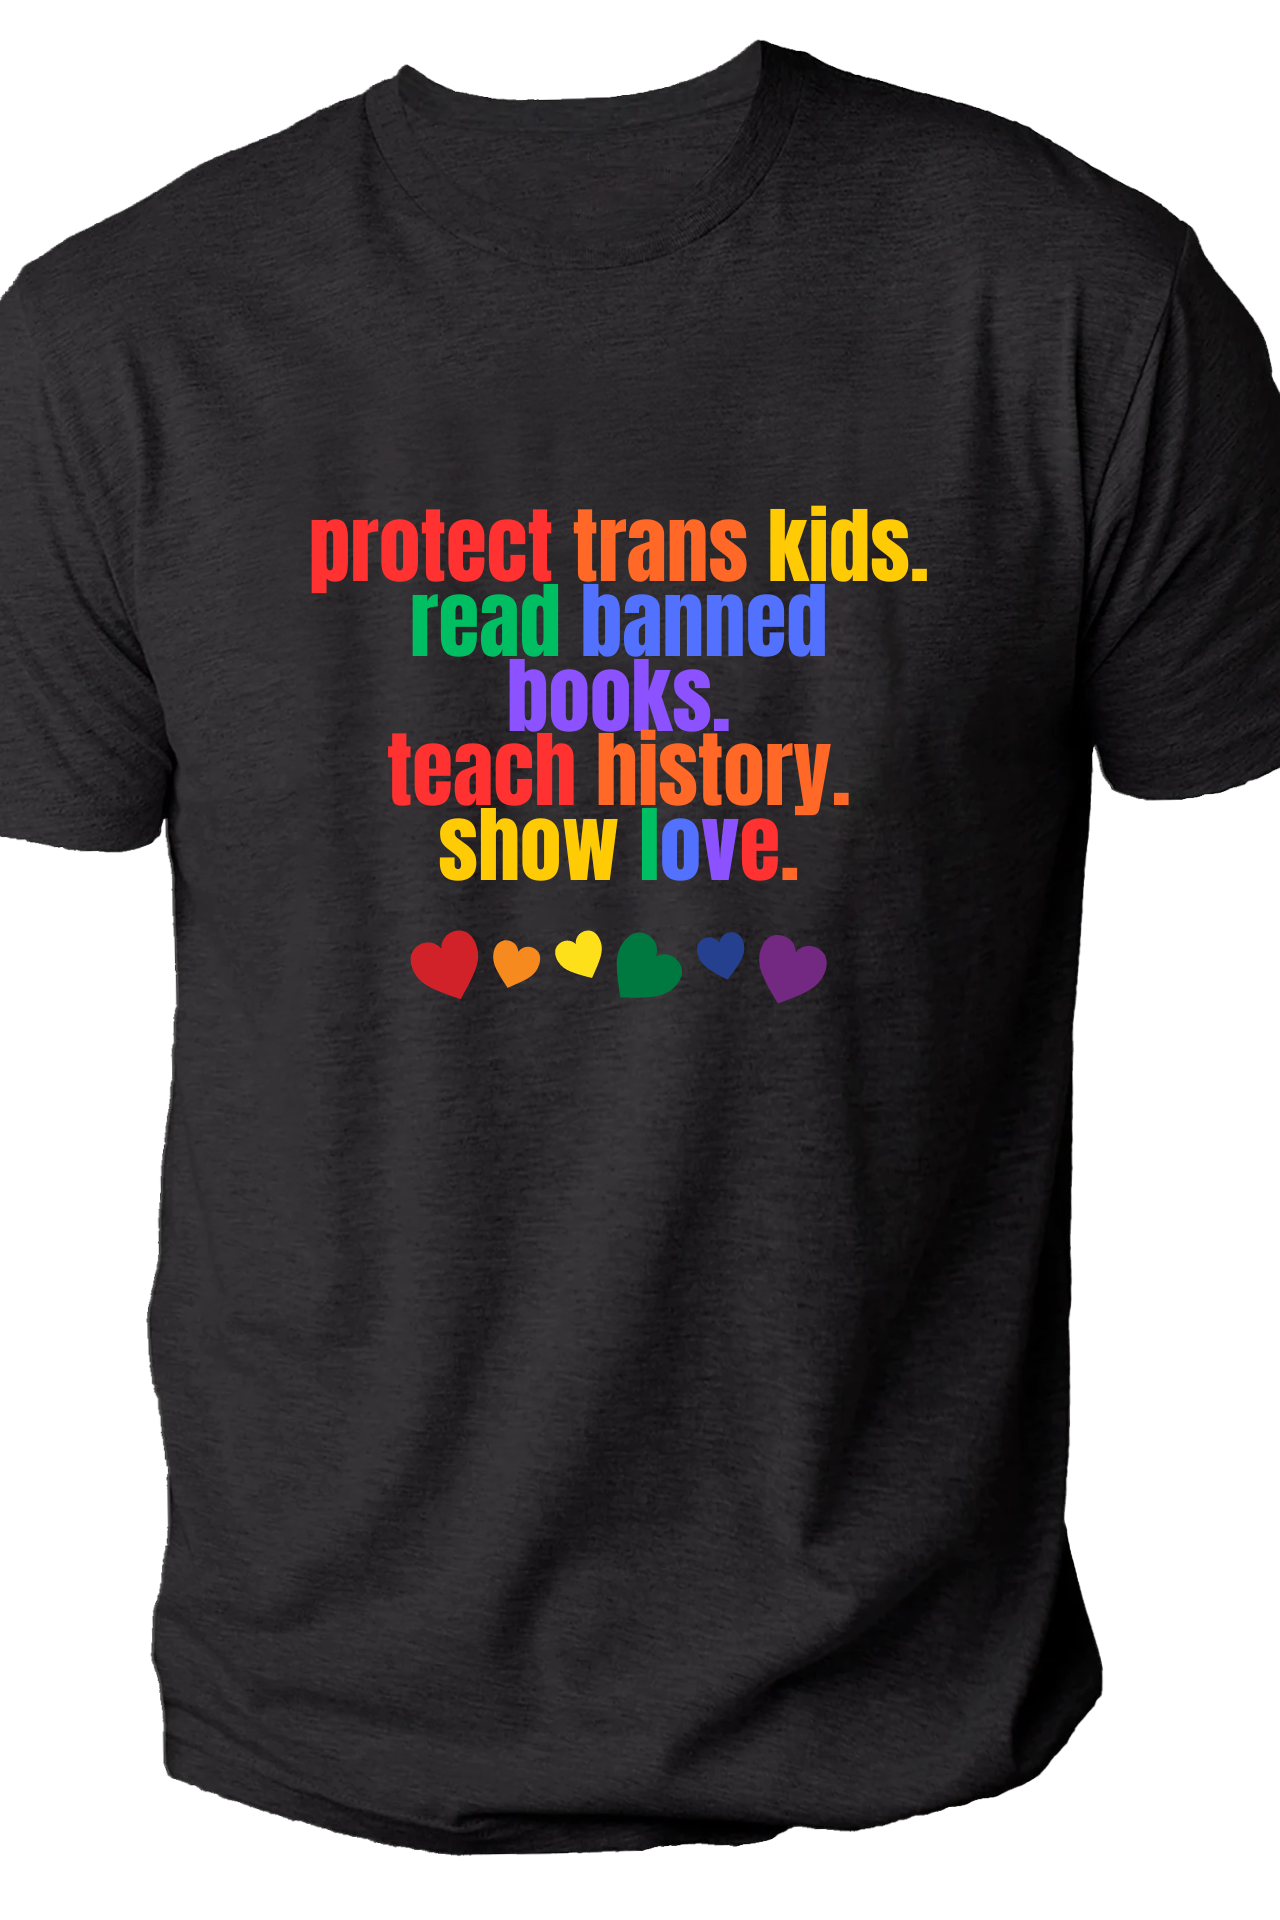 Protect Trans Kids, Read Banned Books, Teach History, Show Love shirt